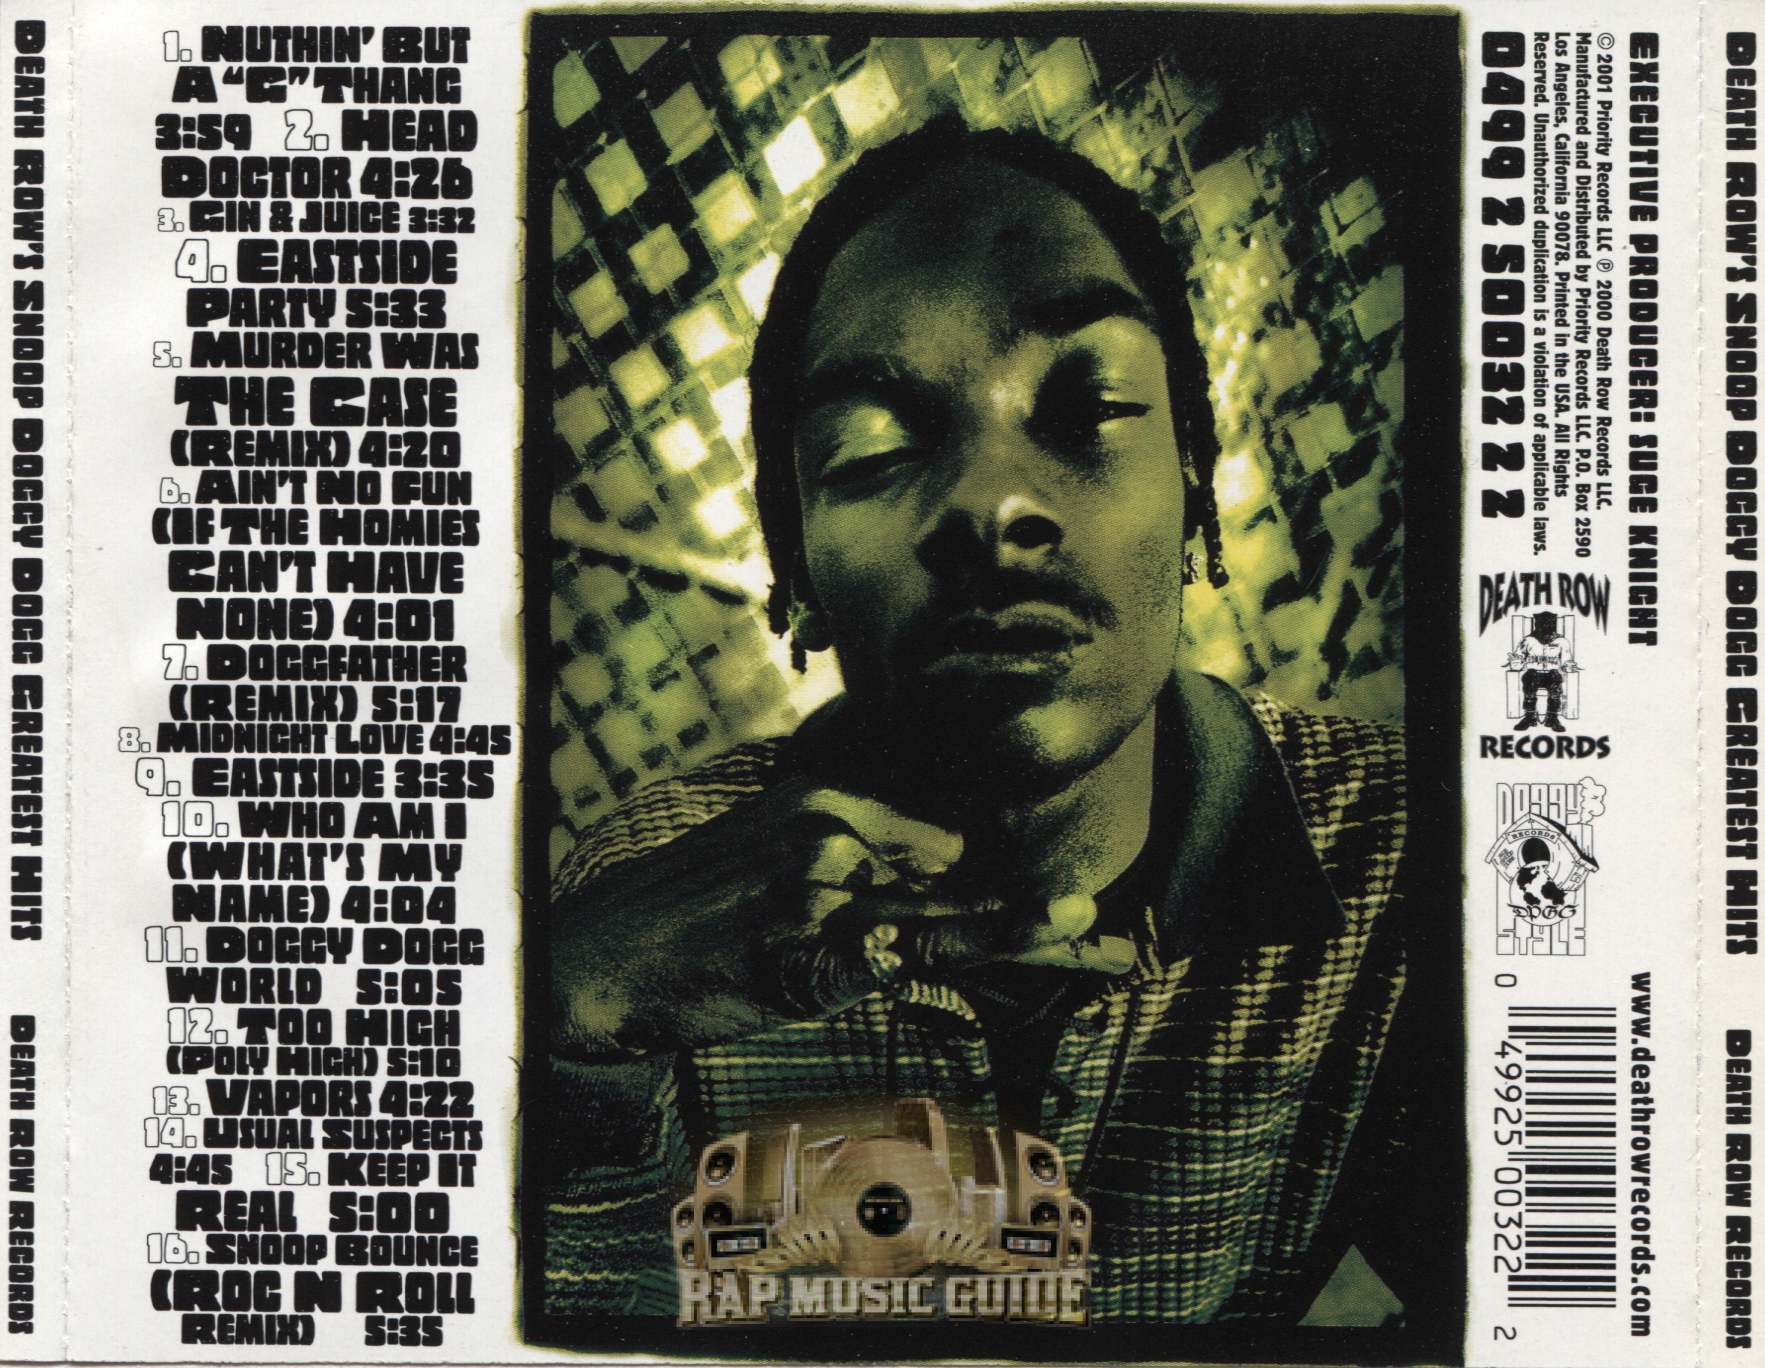 Snoop Doggy Dogg - Greatest Hits: CD | Rap Music Guide